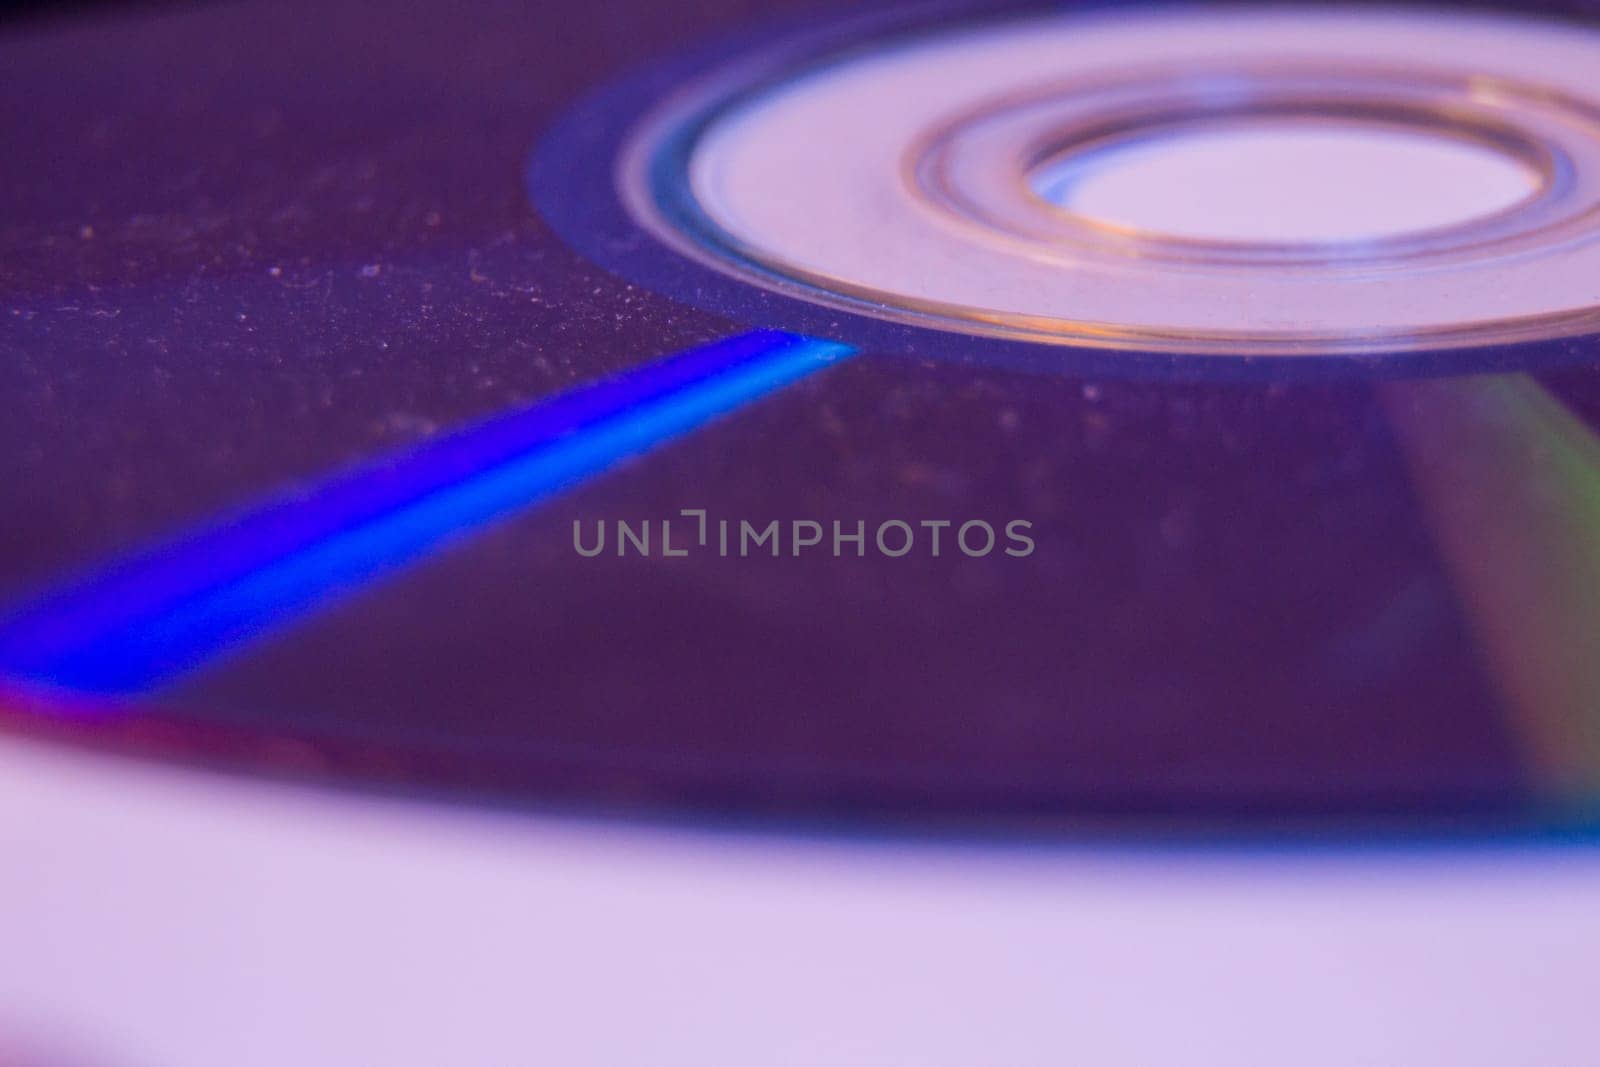 Macro closeup of Compact CD or DVD disc in violet color.